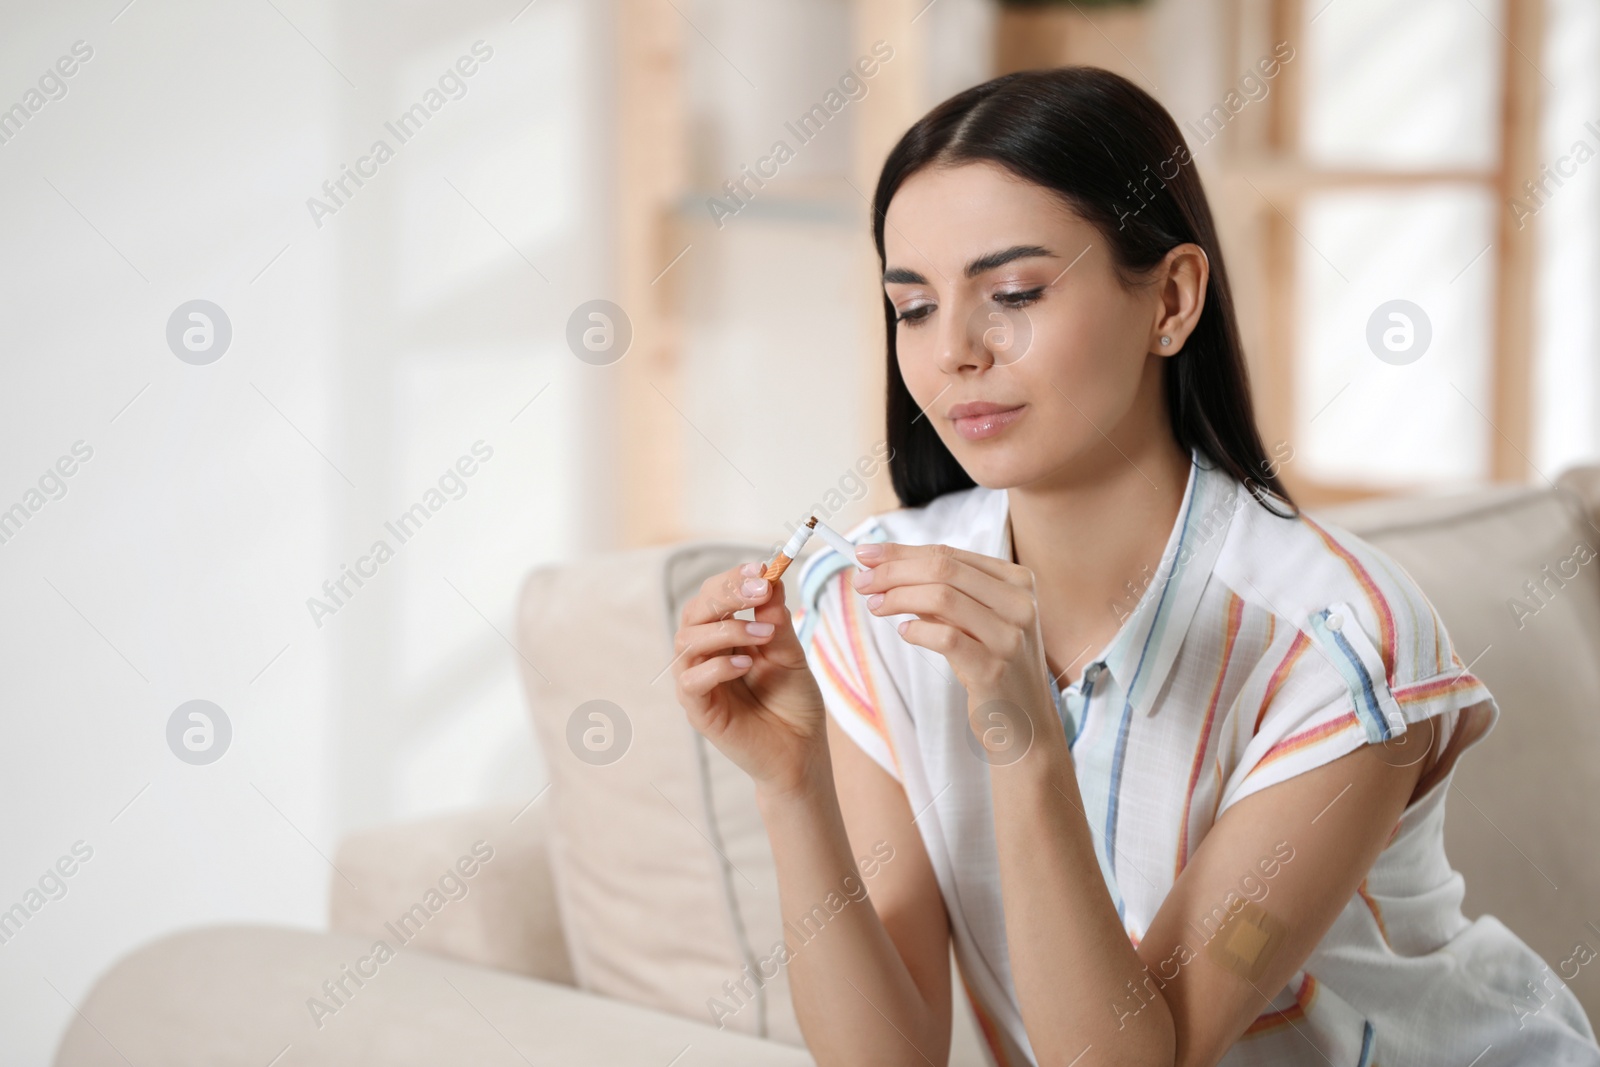 Photo of Young woman with nicotine patch and cigarette at home